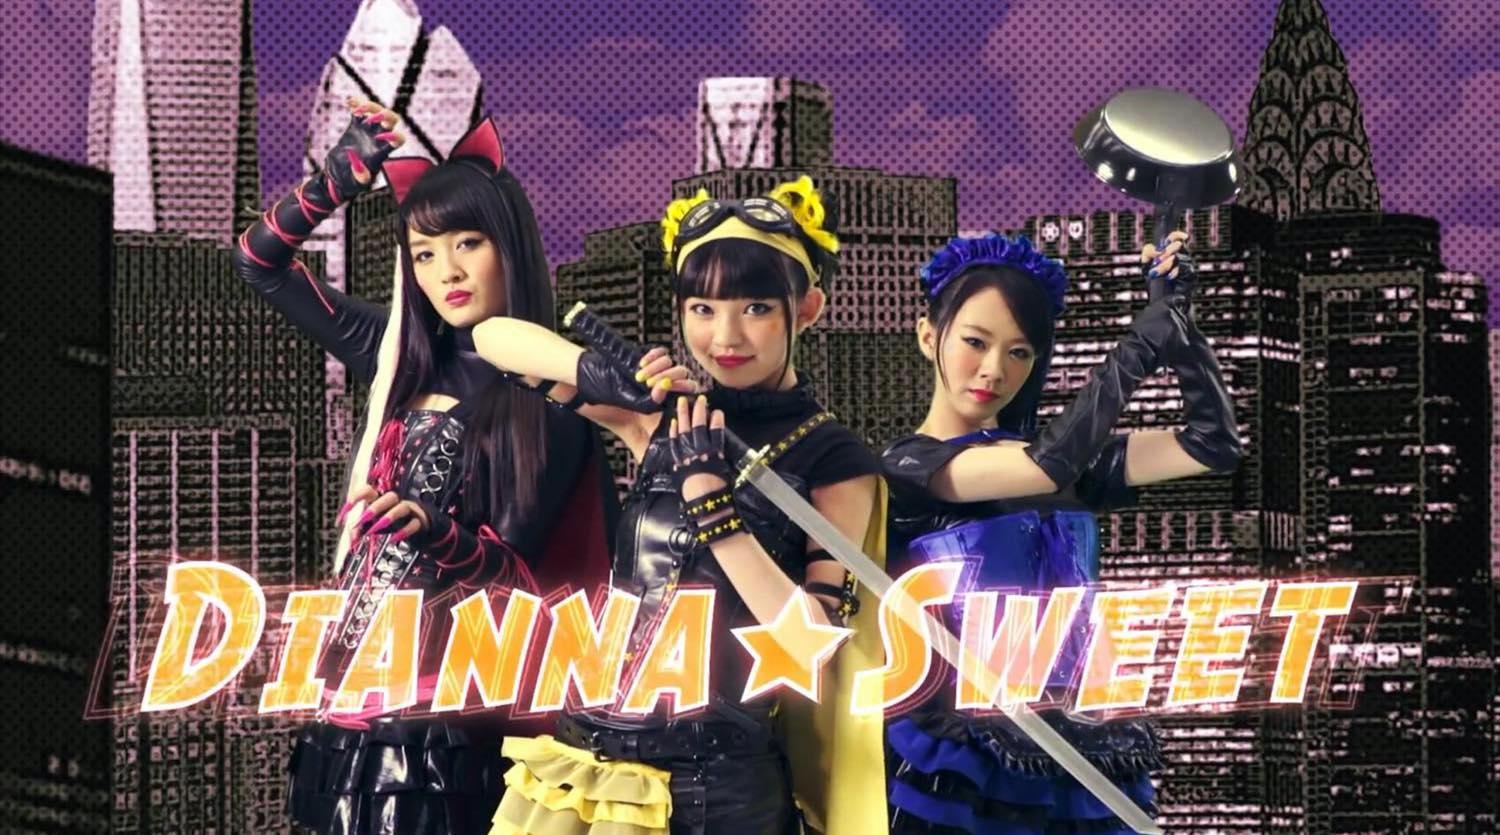 DIANNA☆SWEET Defeat the Forces of Evil in the MV for “Superhero”!